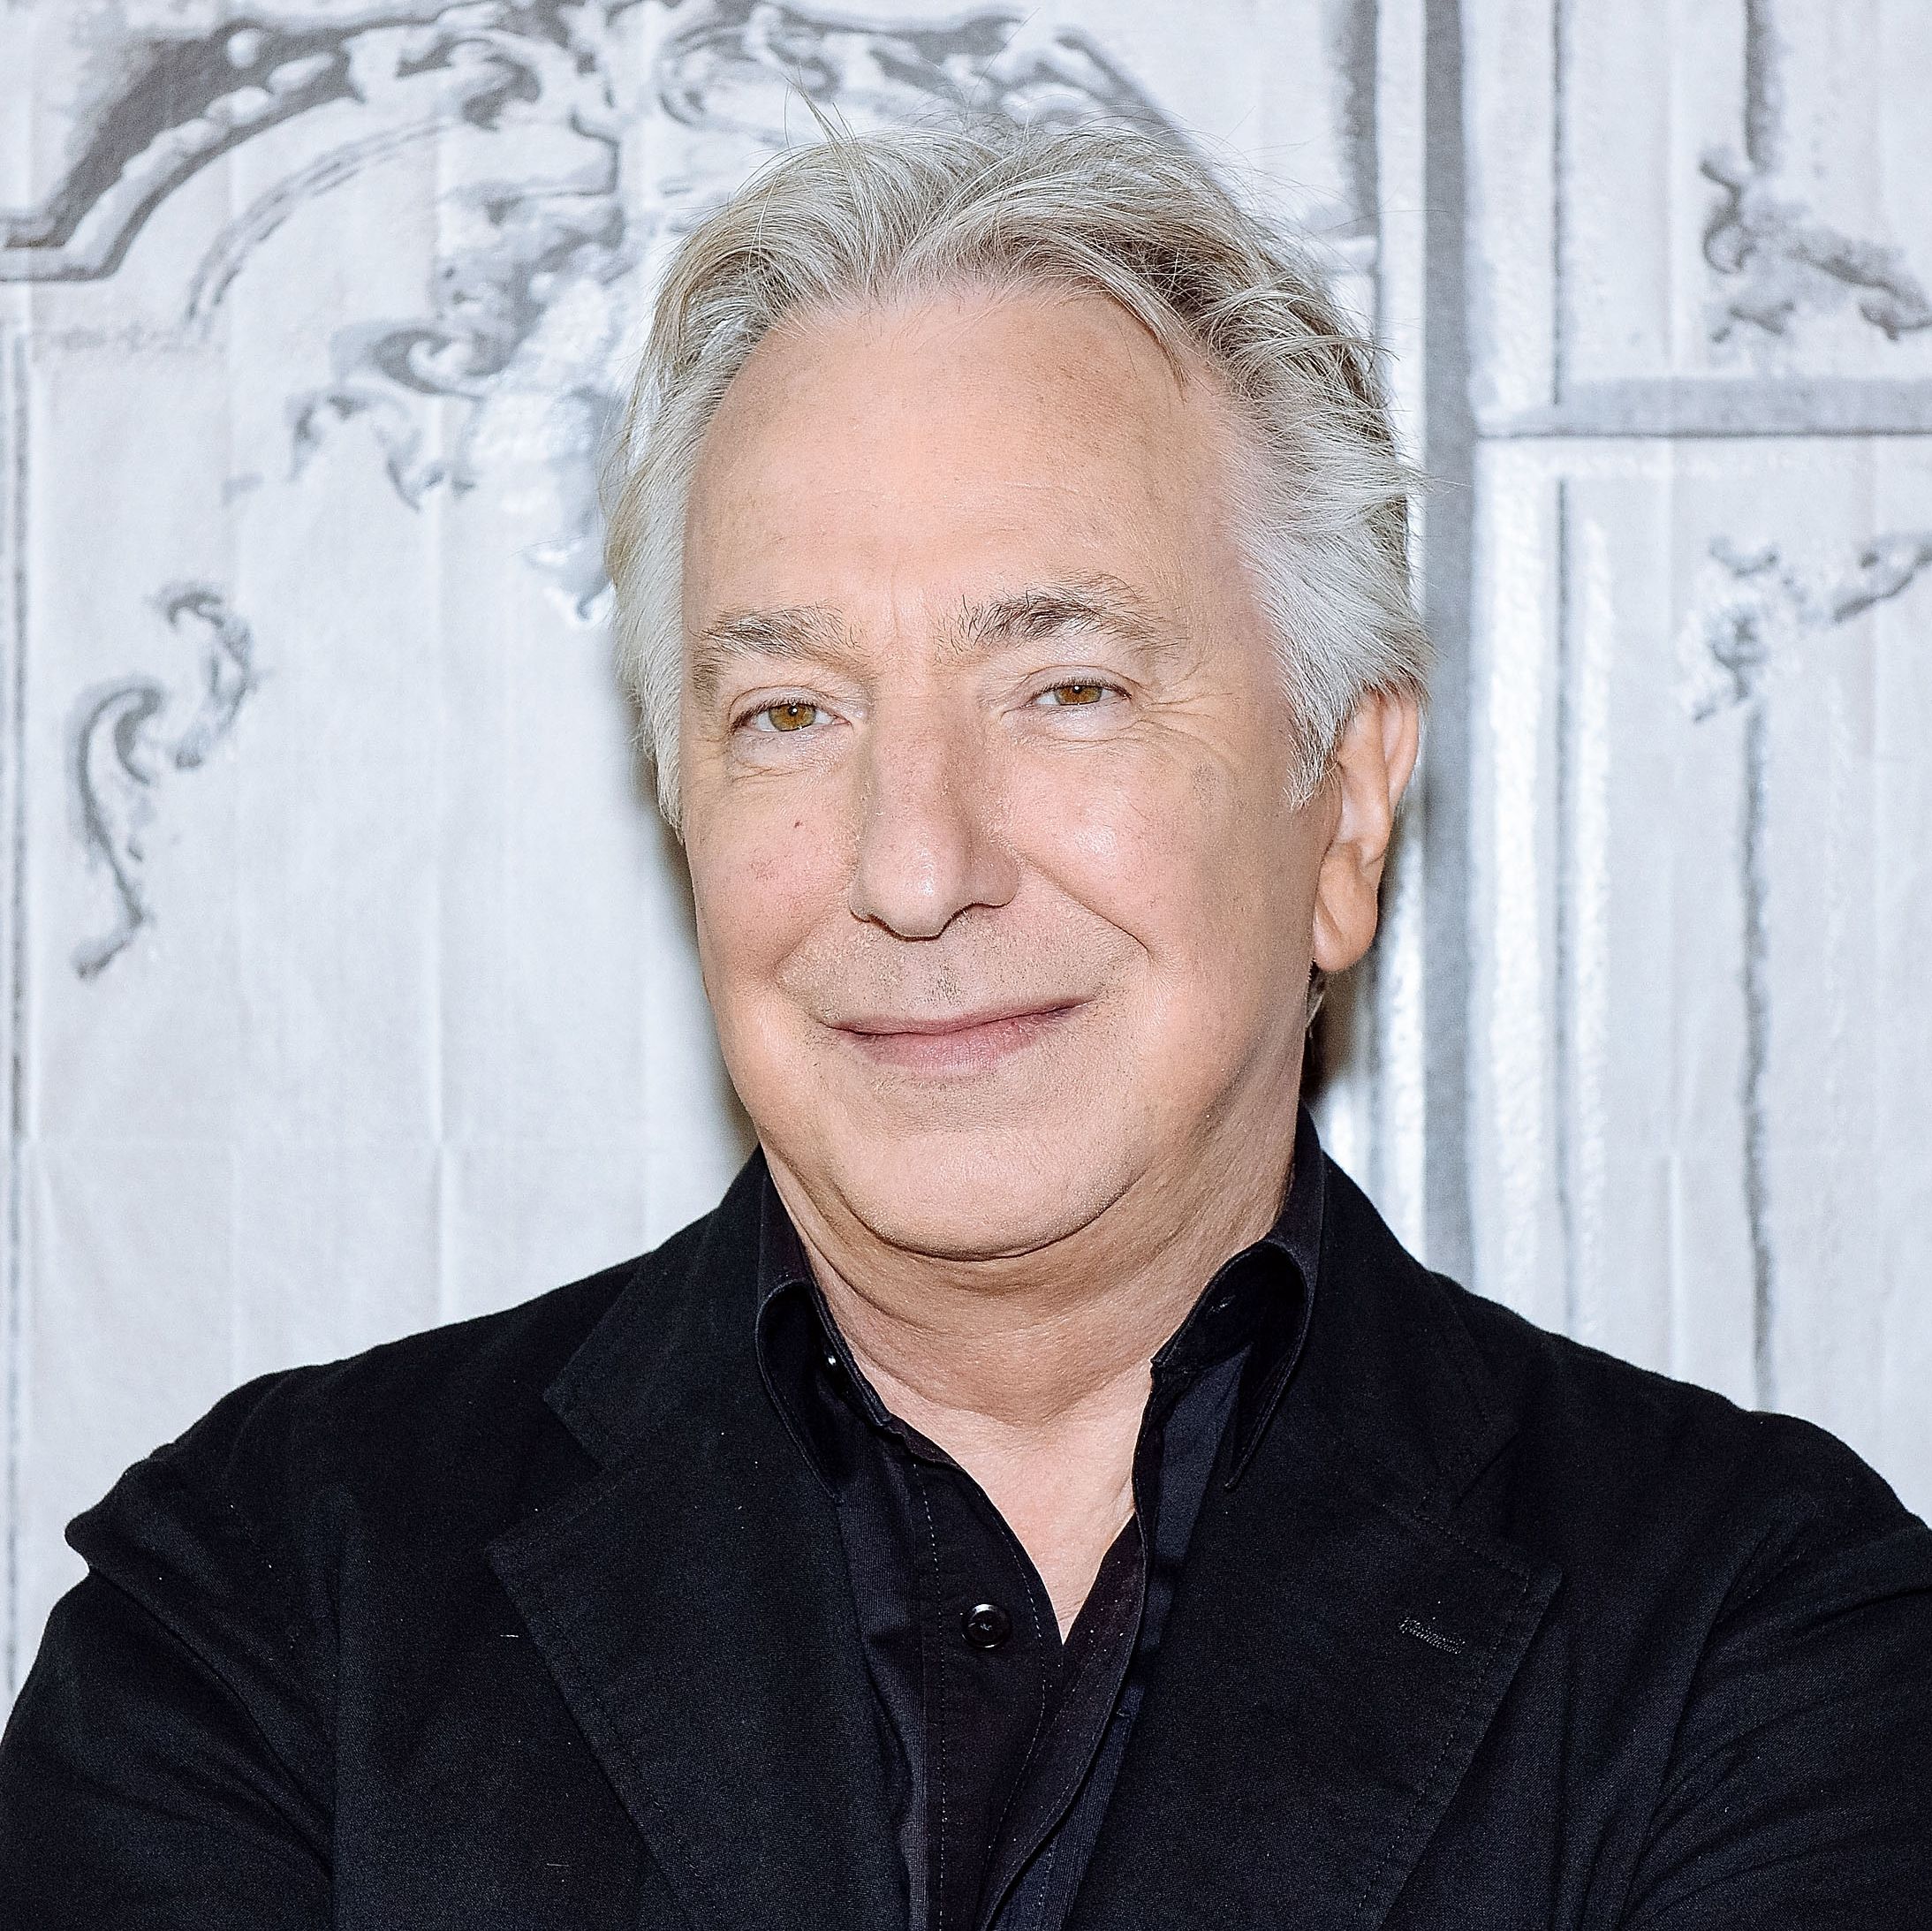 Alan Rickman: A life in pictures - BBC News